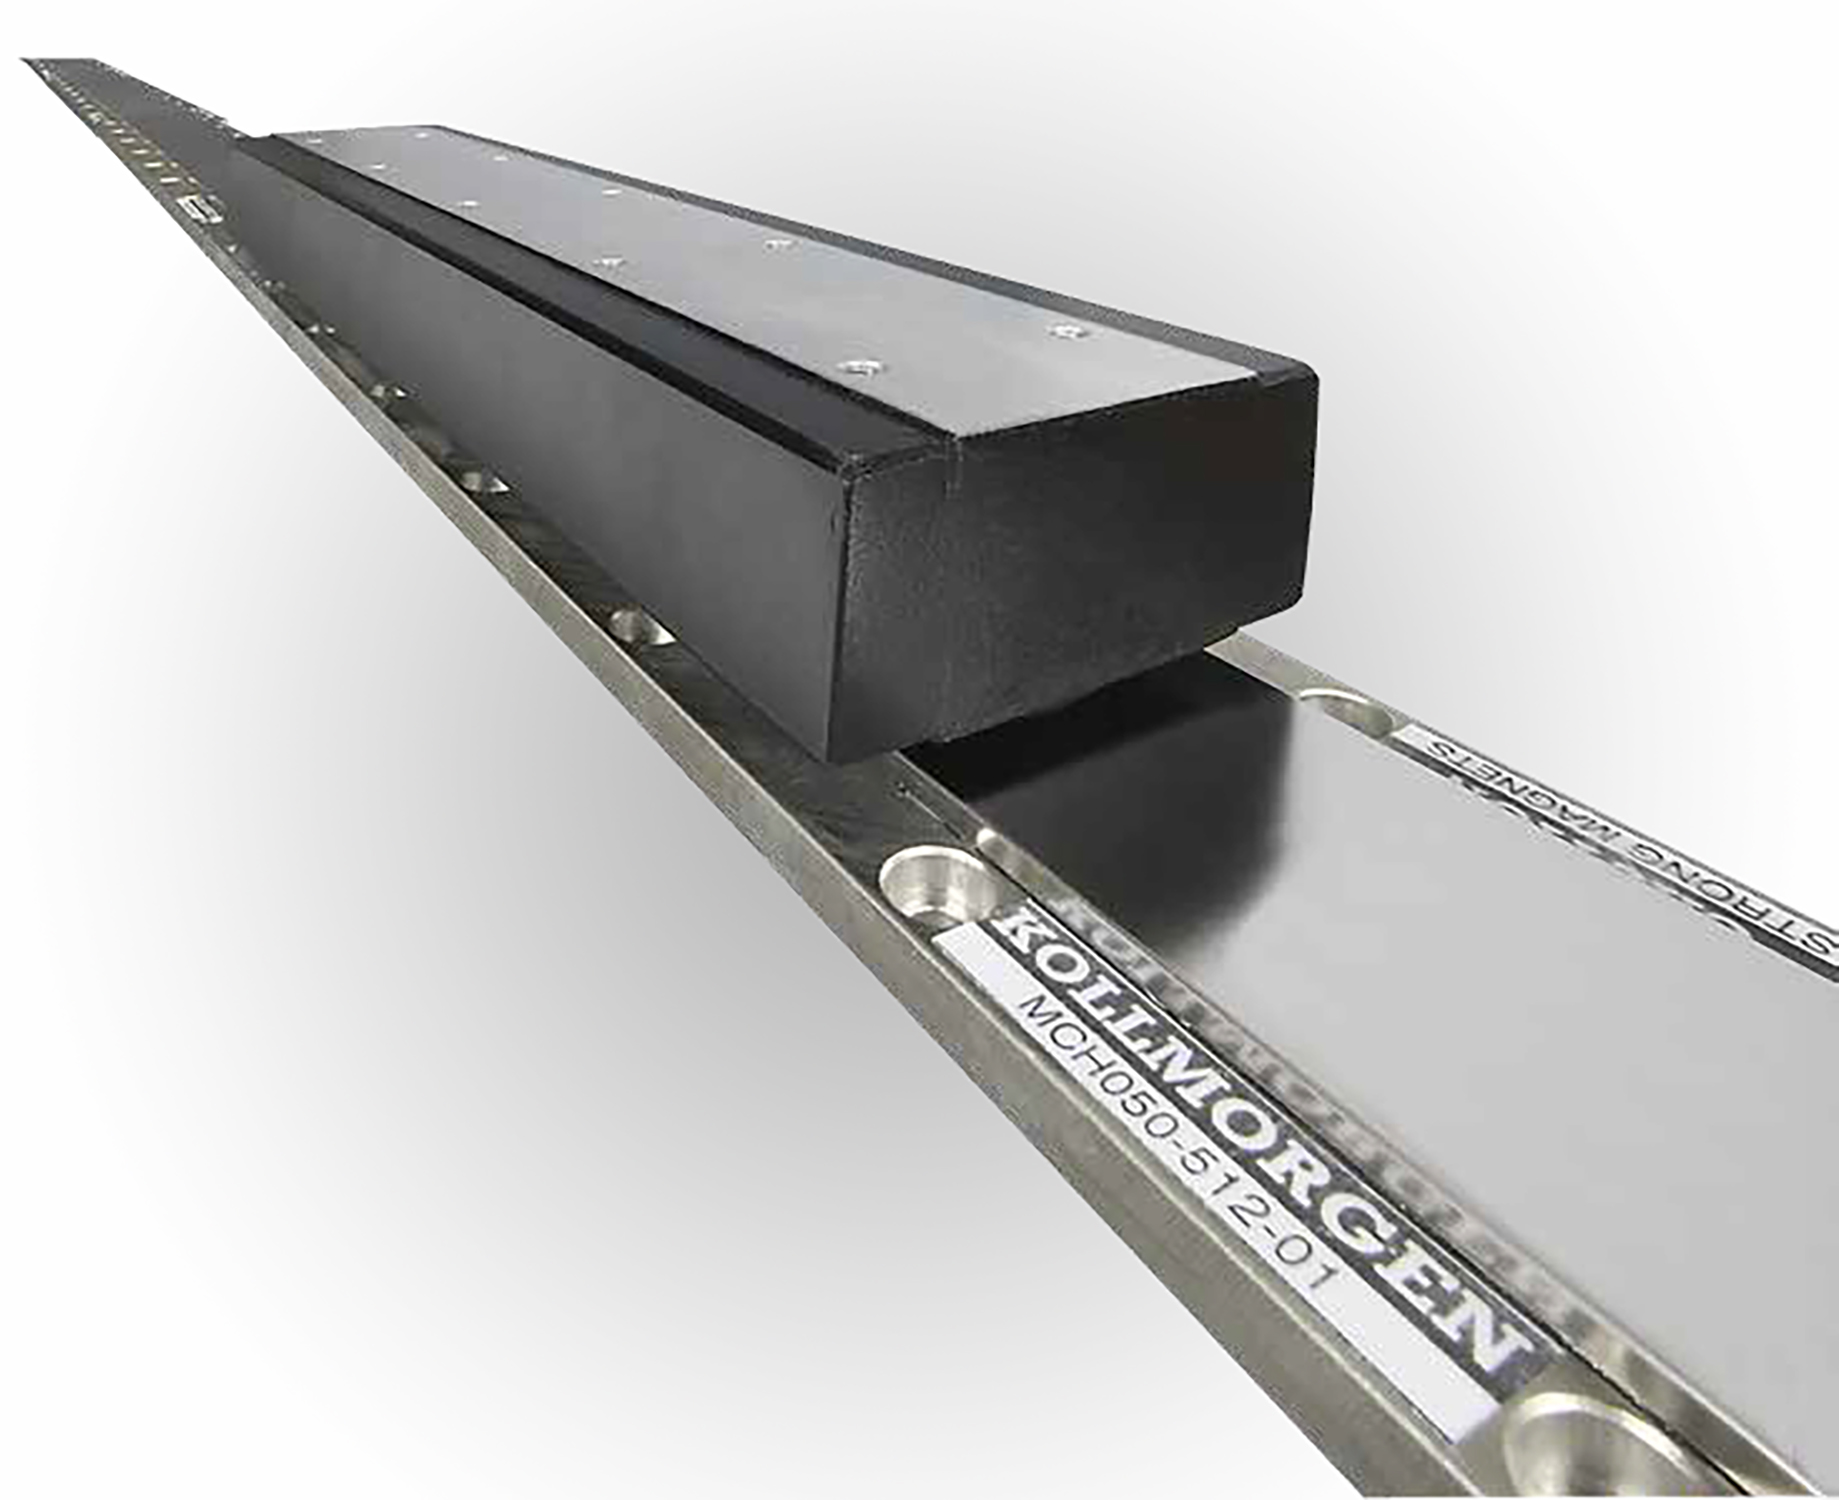 Kollmorgen drive linear motor series provides new dimensions in performance with high throughput, accuracy, and zero maintenance.